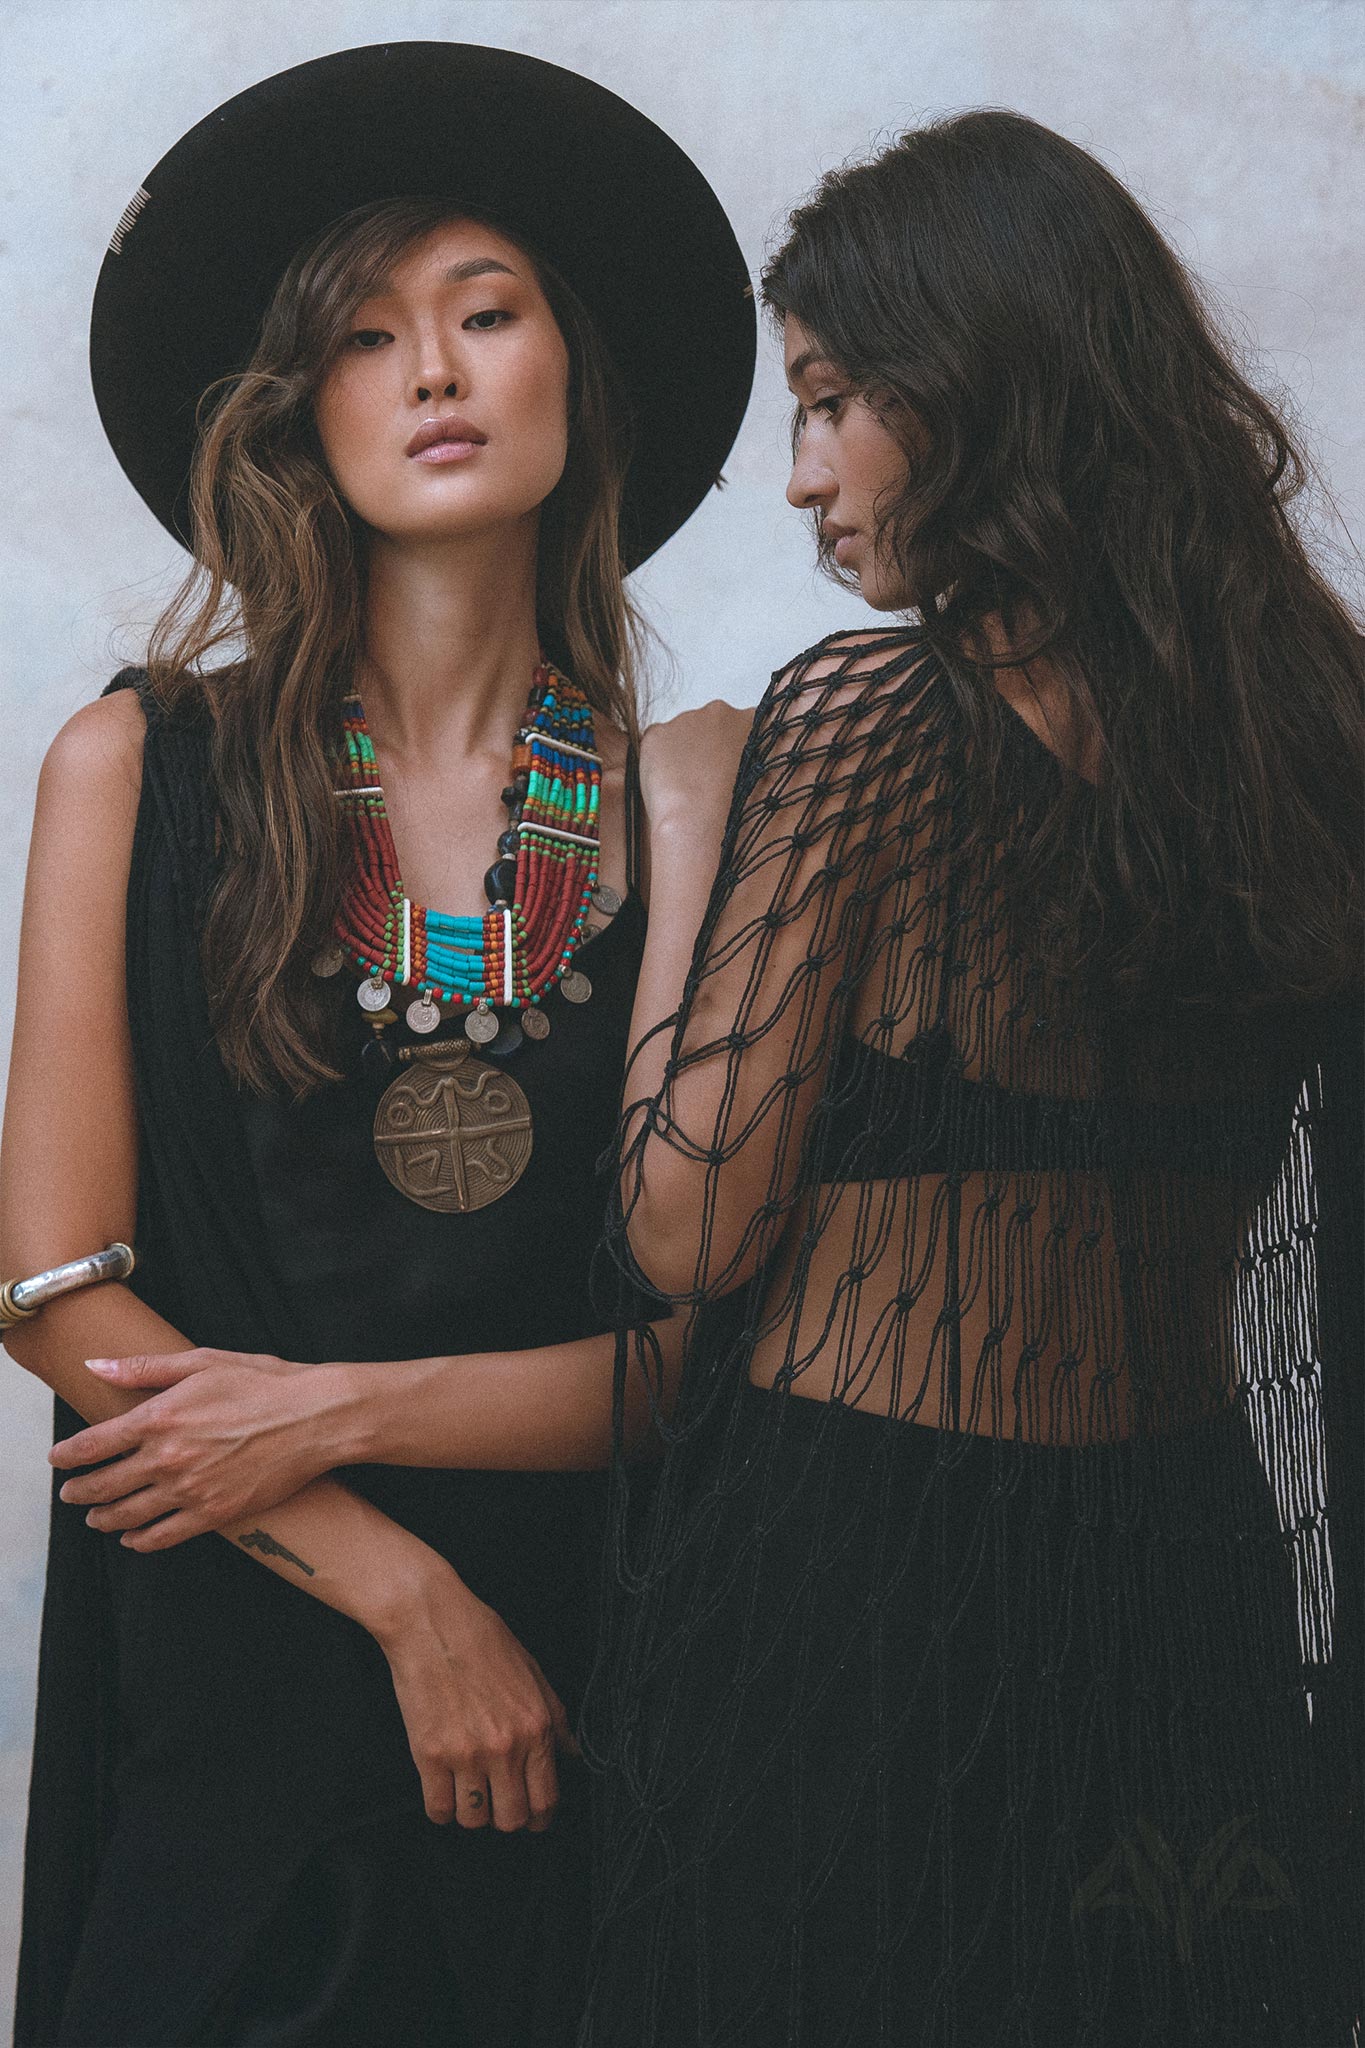 Get summer-ready with the black Summer Net Cover Up by Aya Sacred Wear.